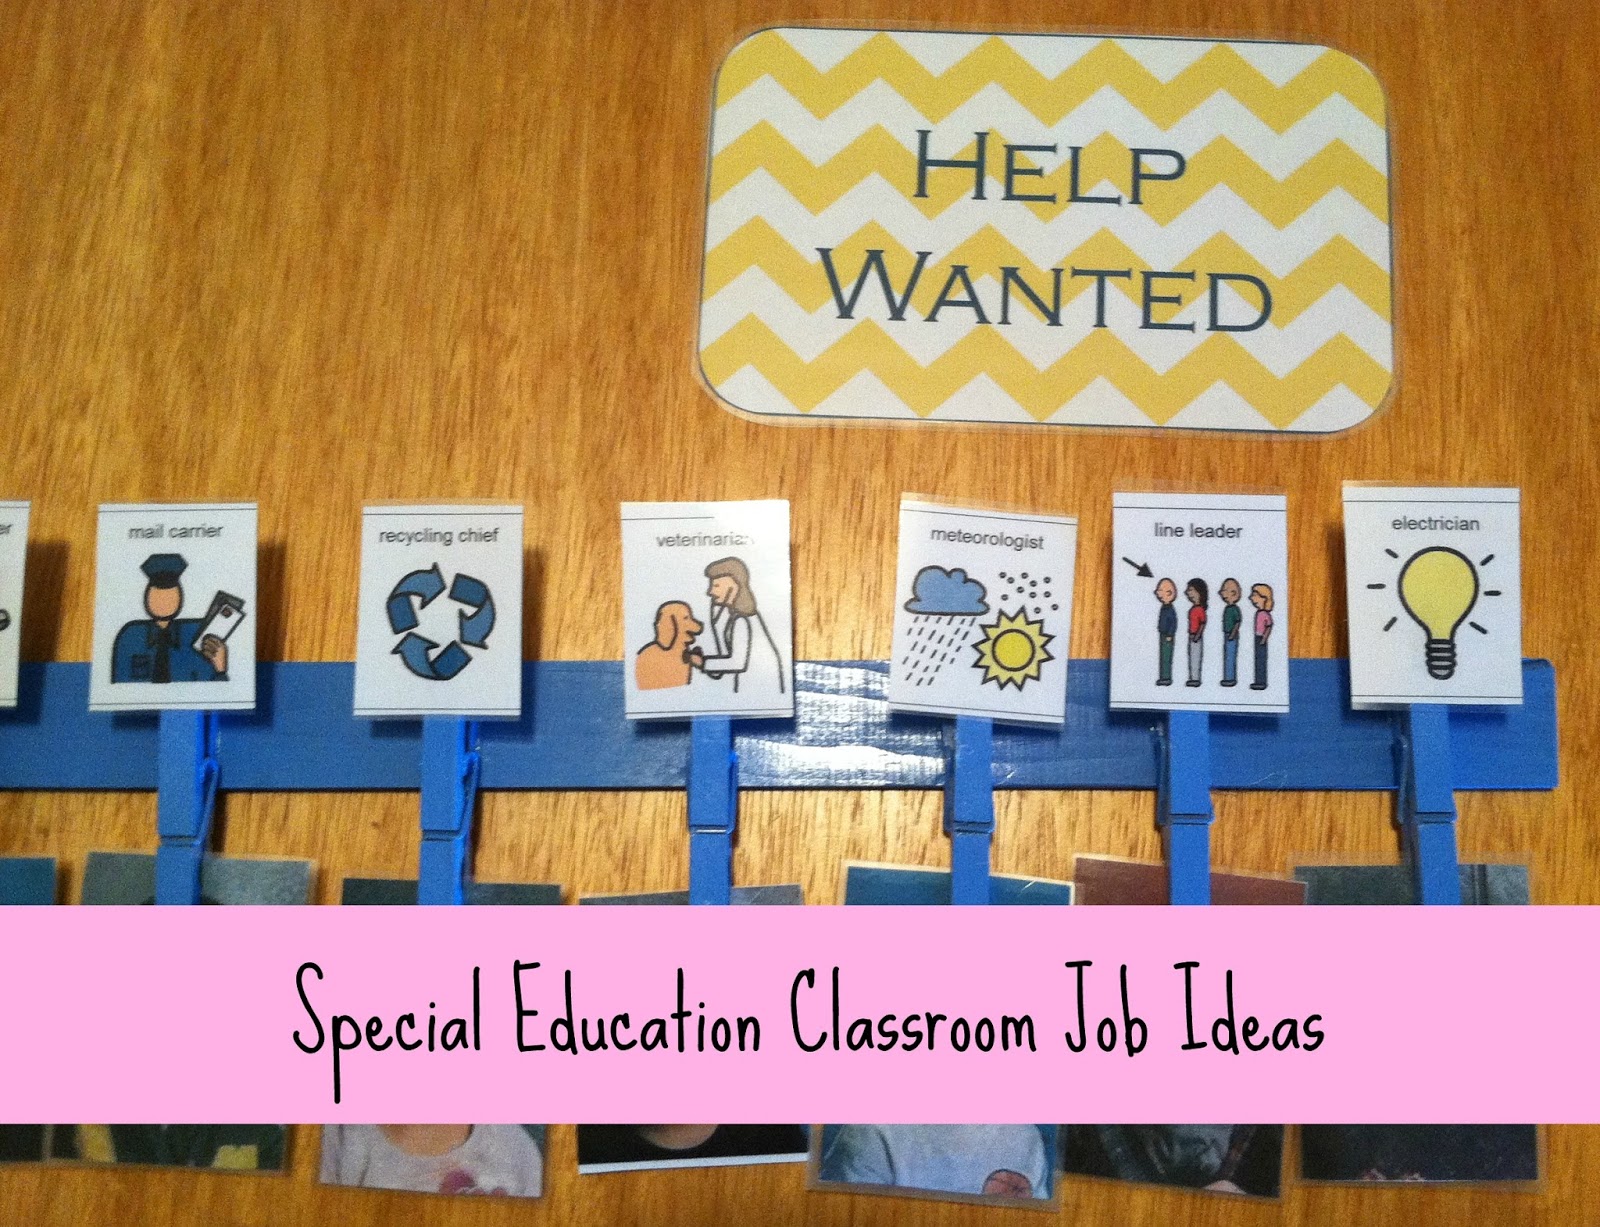 How to teach job skills to special ed students